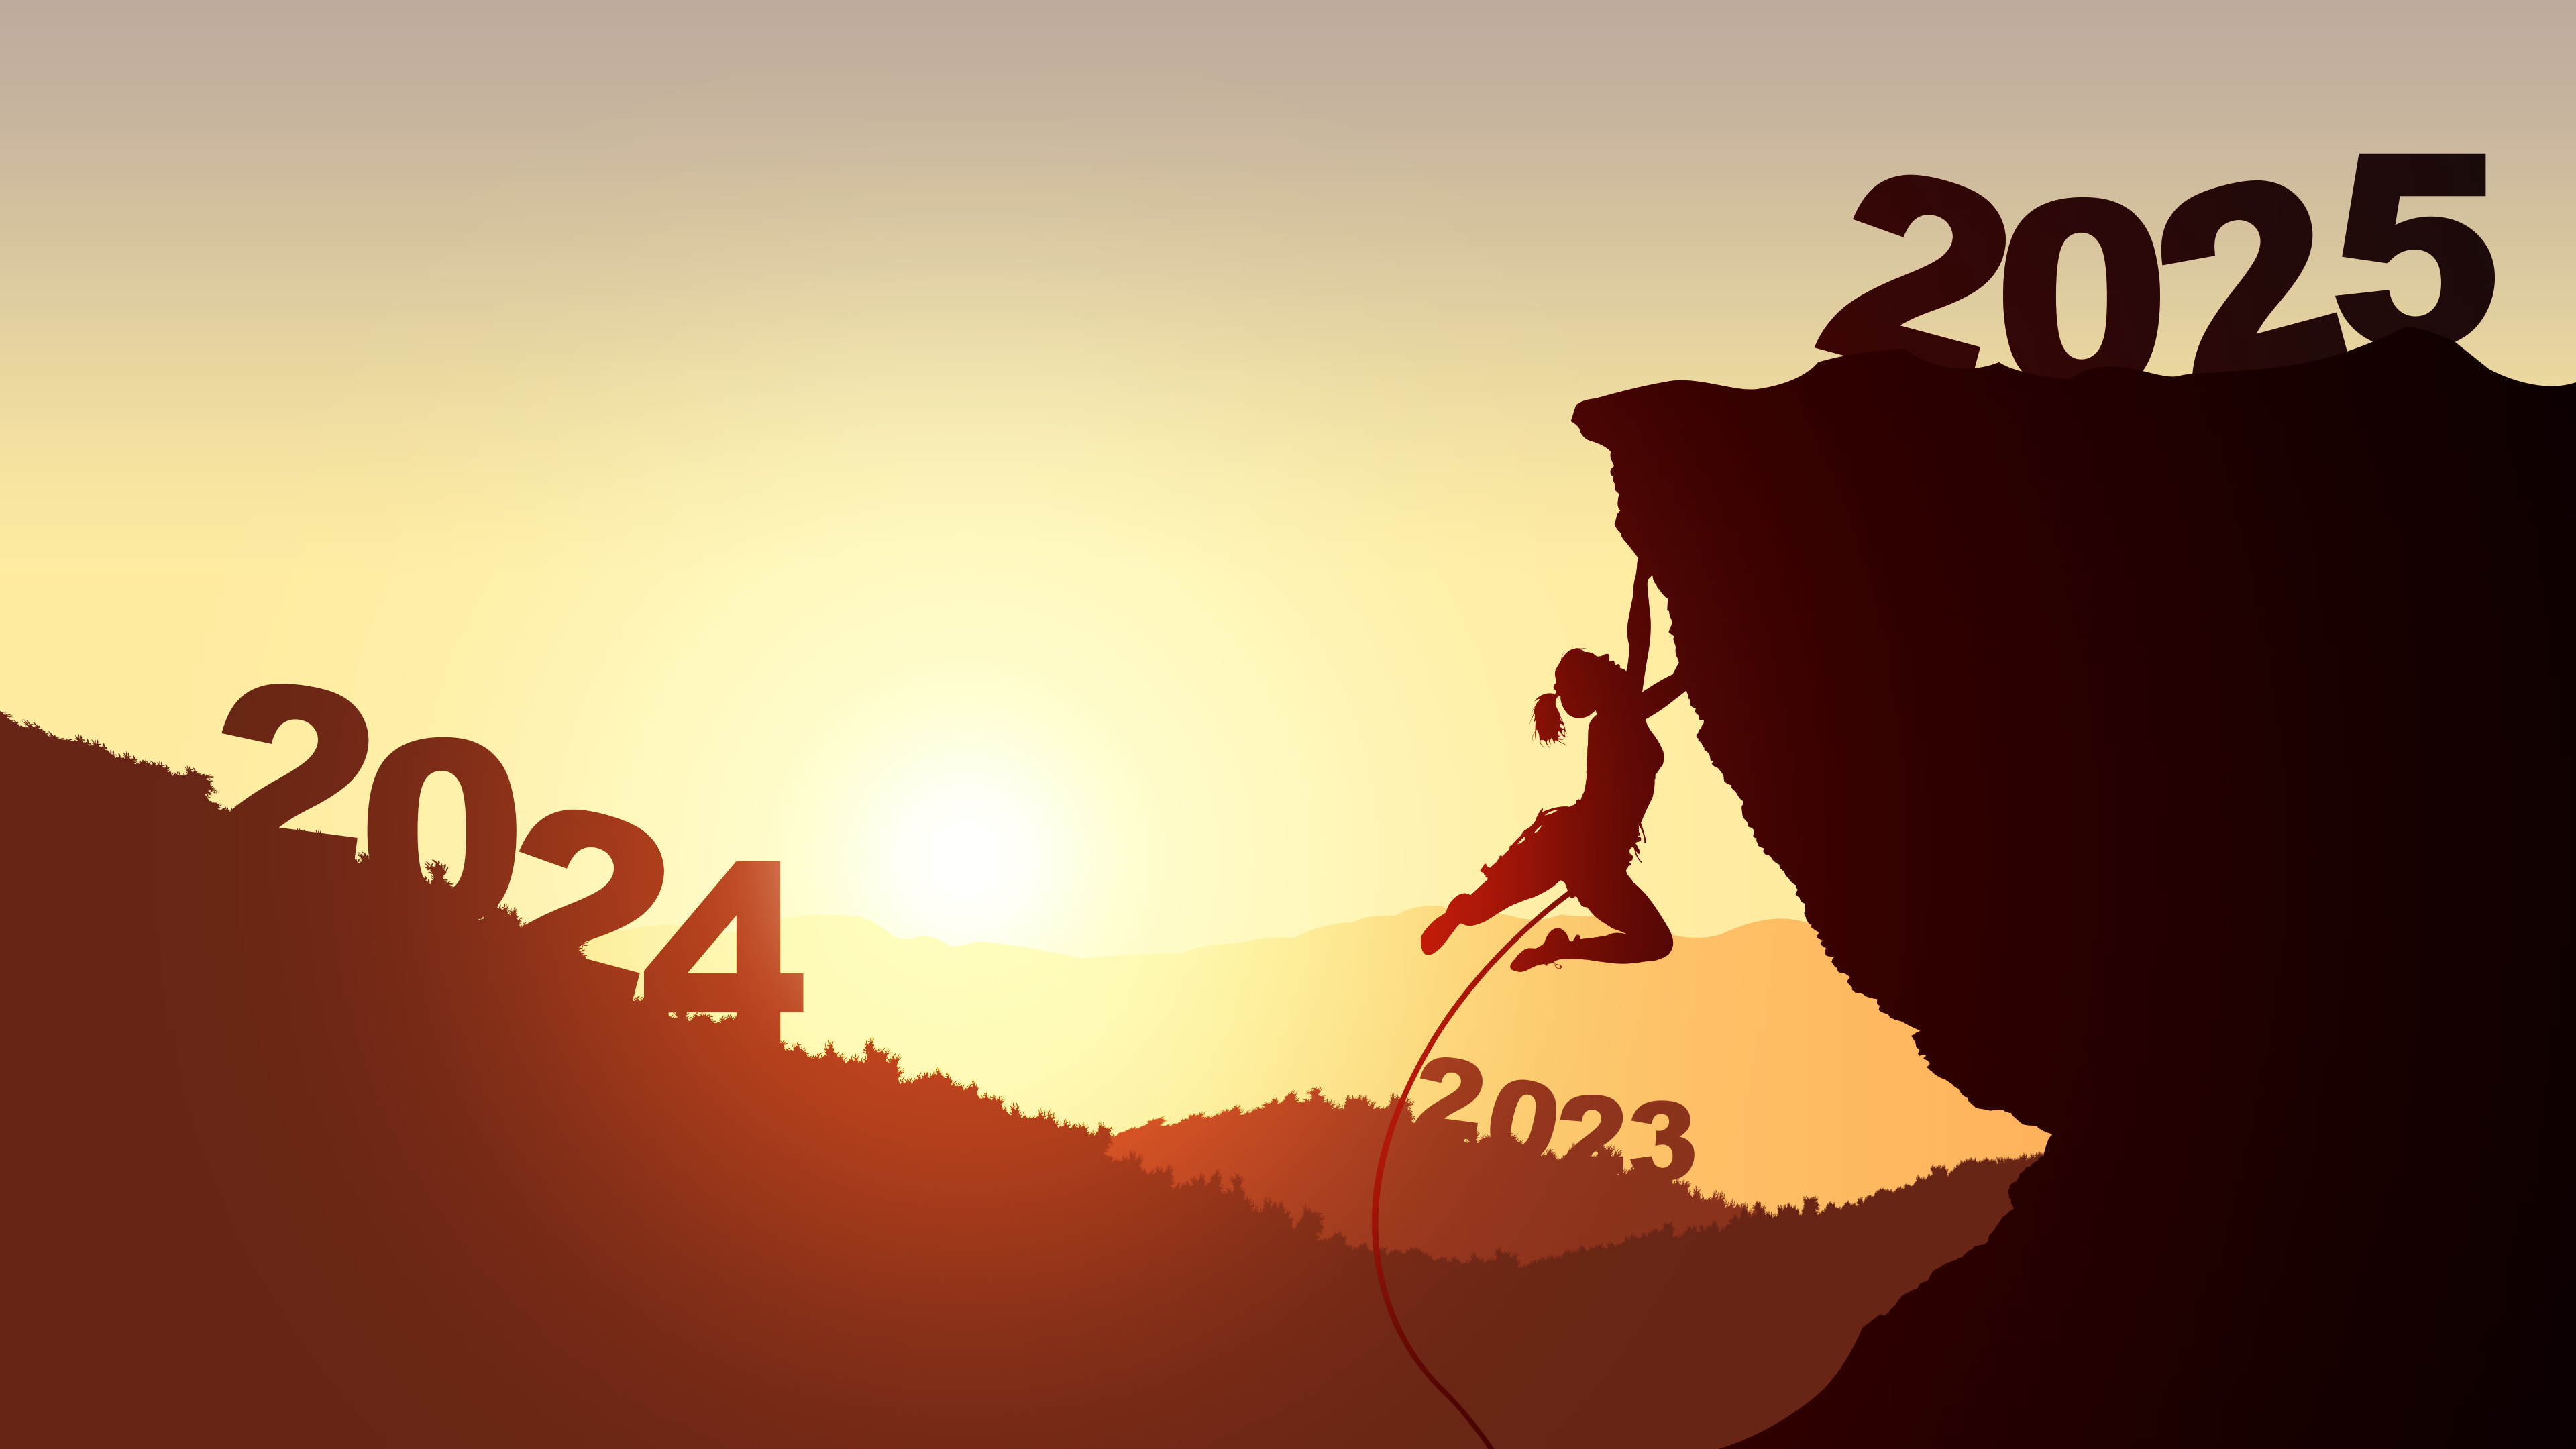 General 3840x2160 2025 (year) New Year silhouette climbing